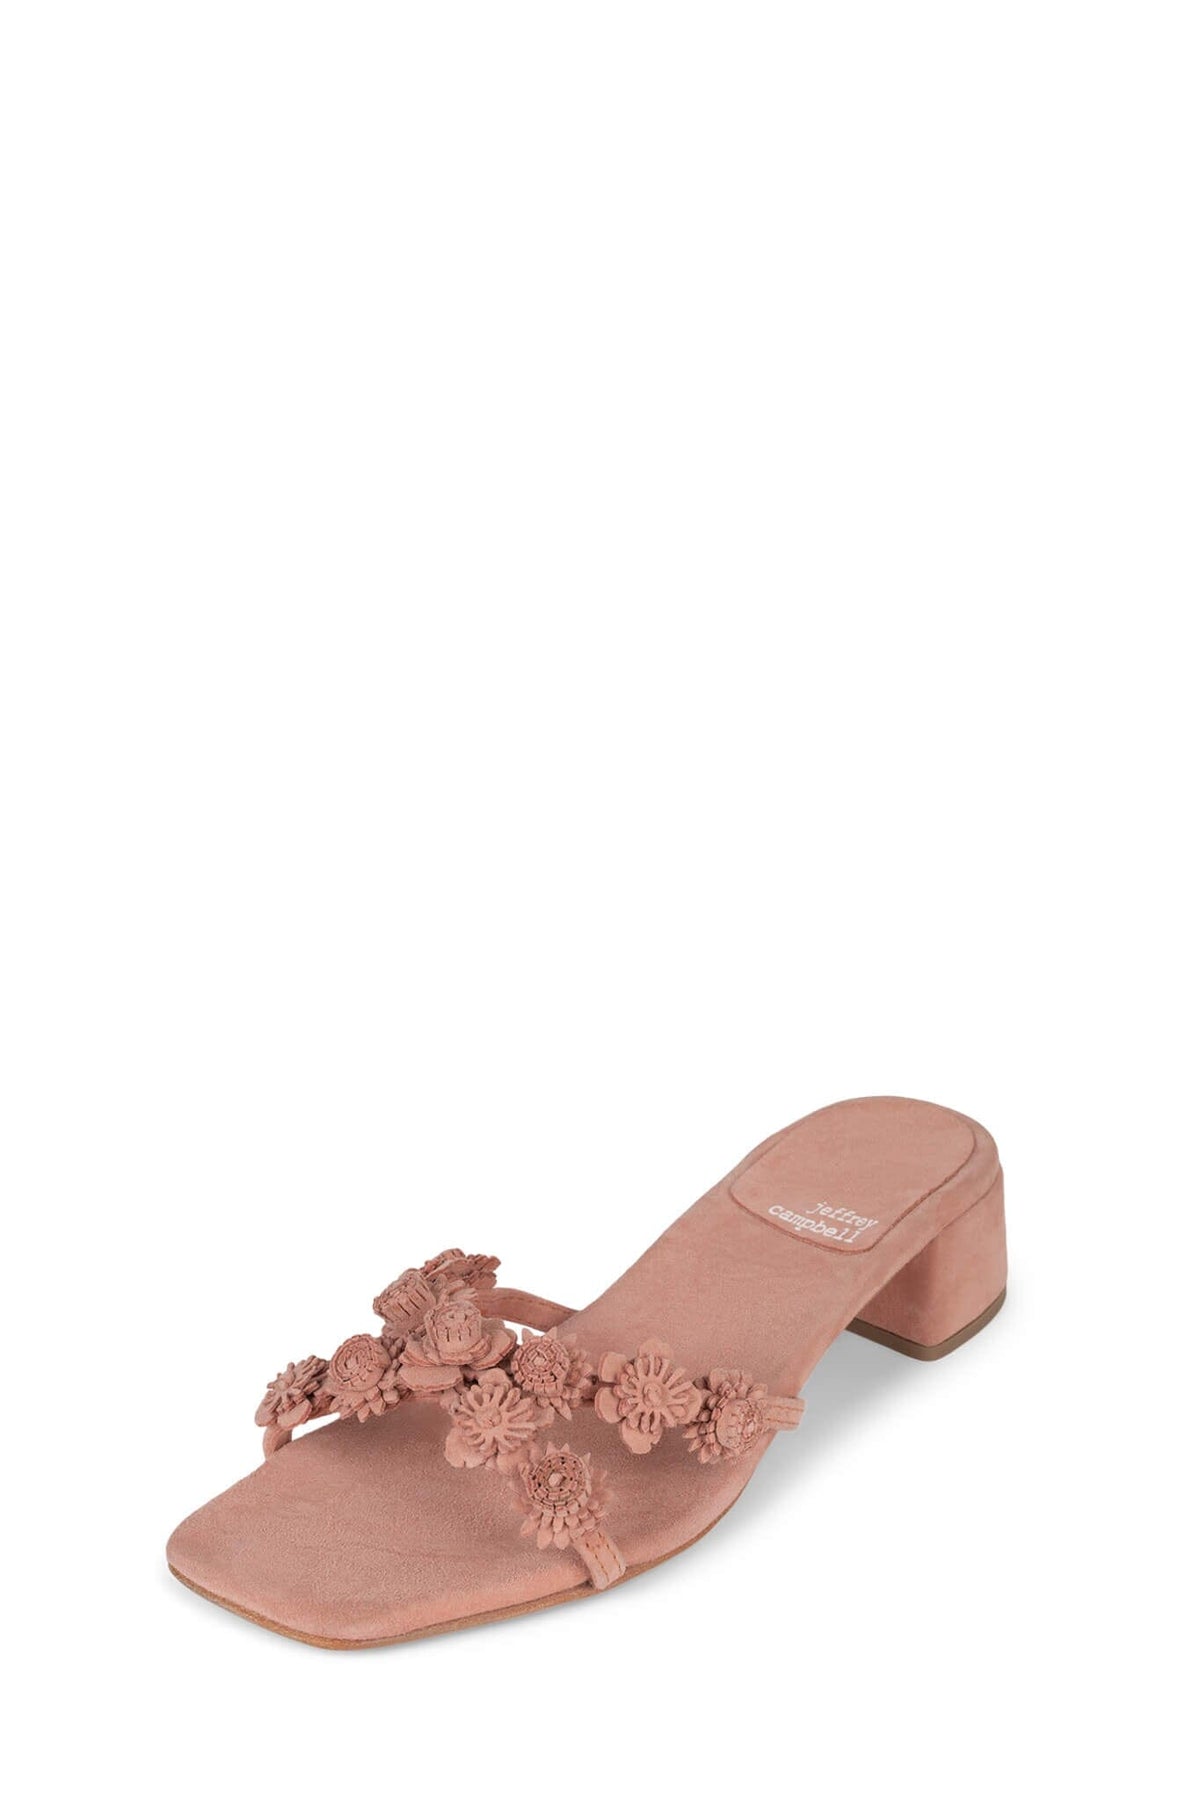 DITZY-LO Jeffrey Campbell Heeled Sandals Peach Suede